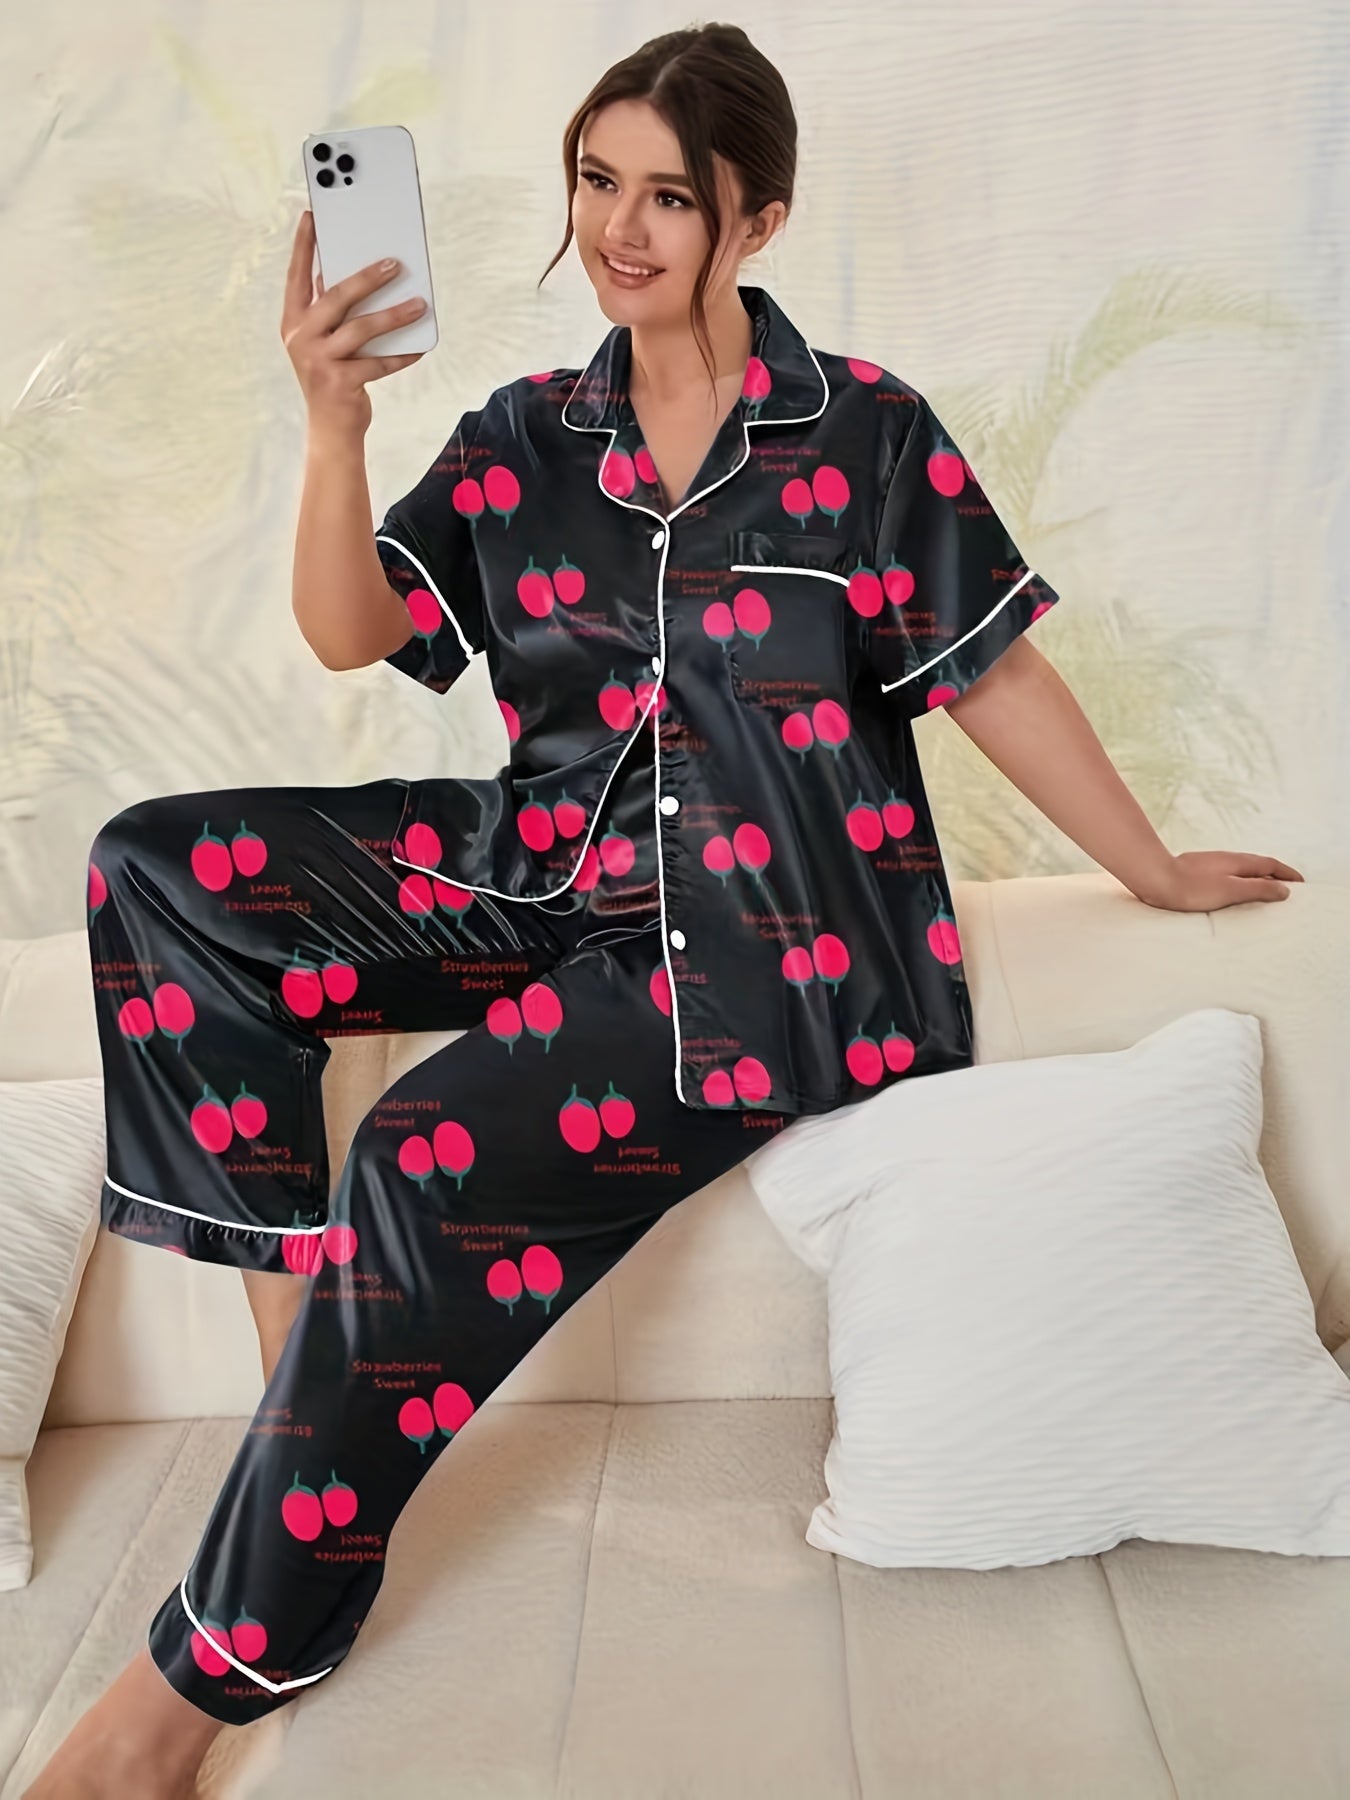 Look & Feel Fabulous in this Plus Size Casual Pajama Set - Women's Satin Leopard Print Tee & Smooth Pants 2pcs Set